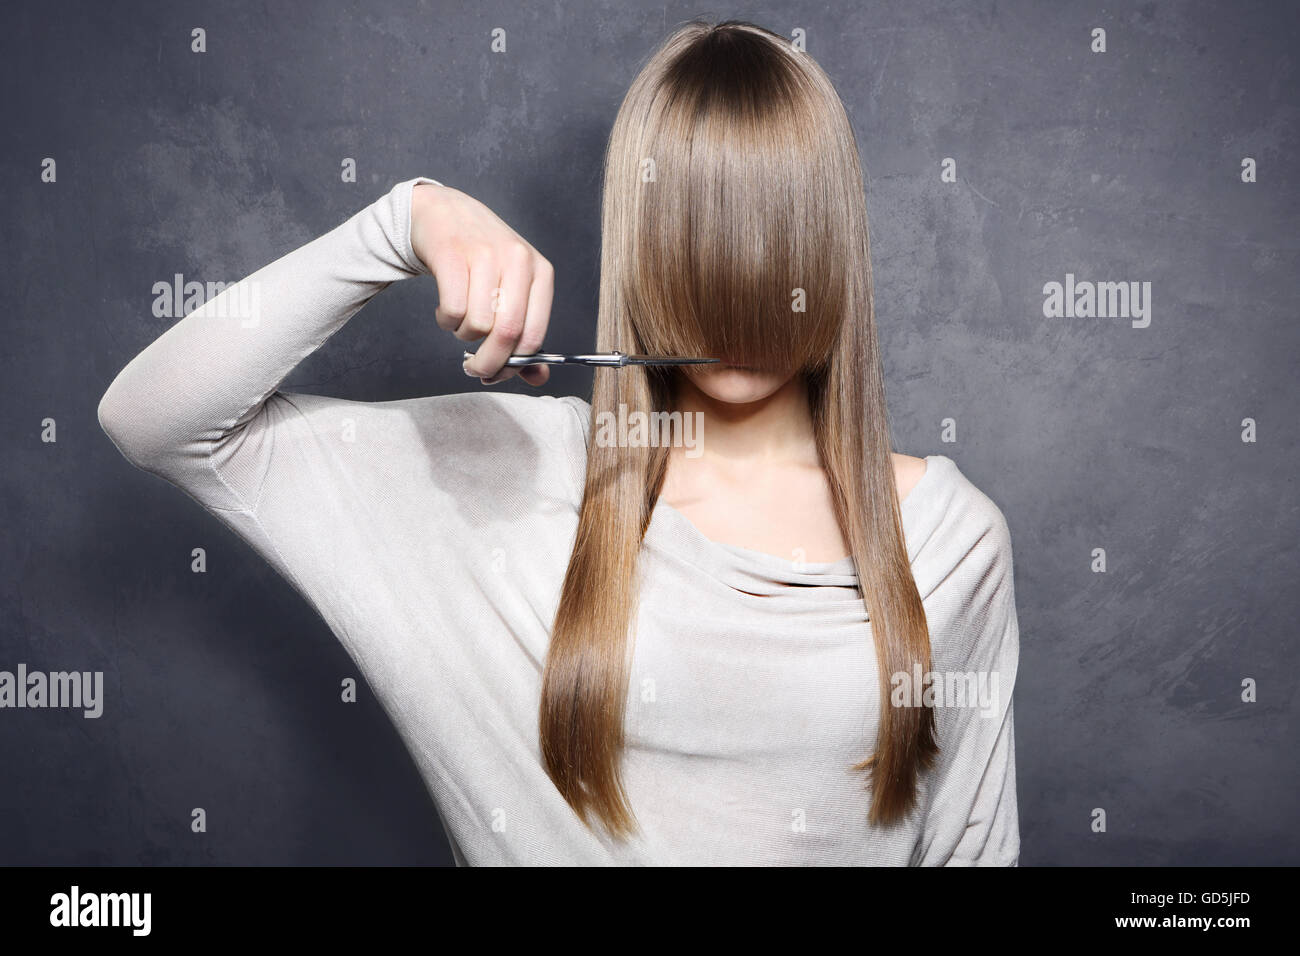 Lovely girl decided to get a haircut Stock Photo